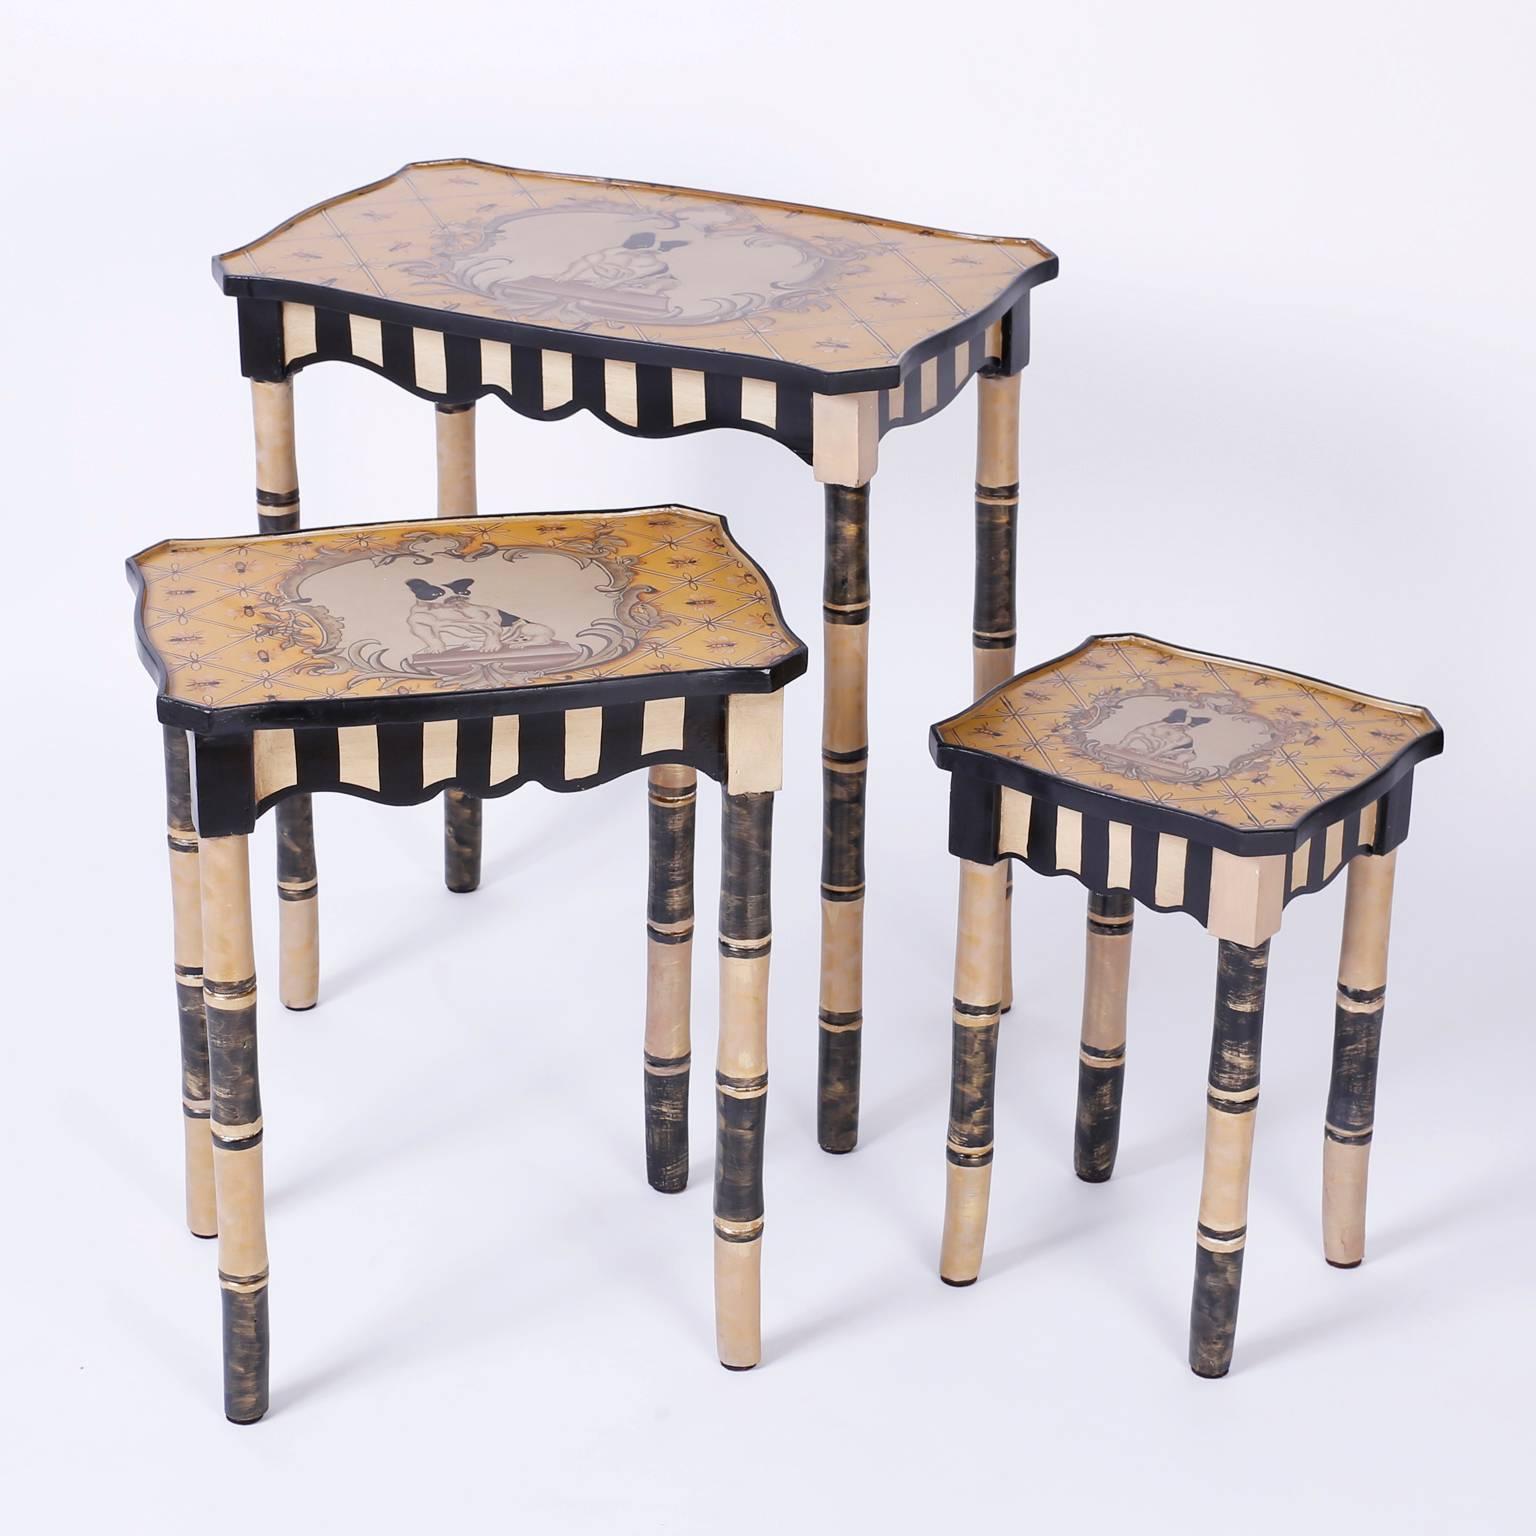 20th Century Dog Themed Nesting Tables For Sale